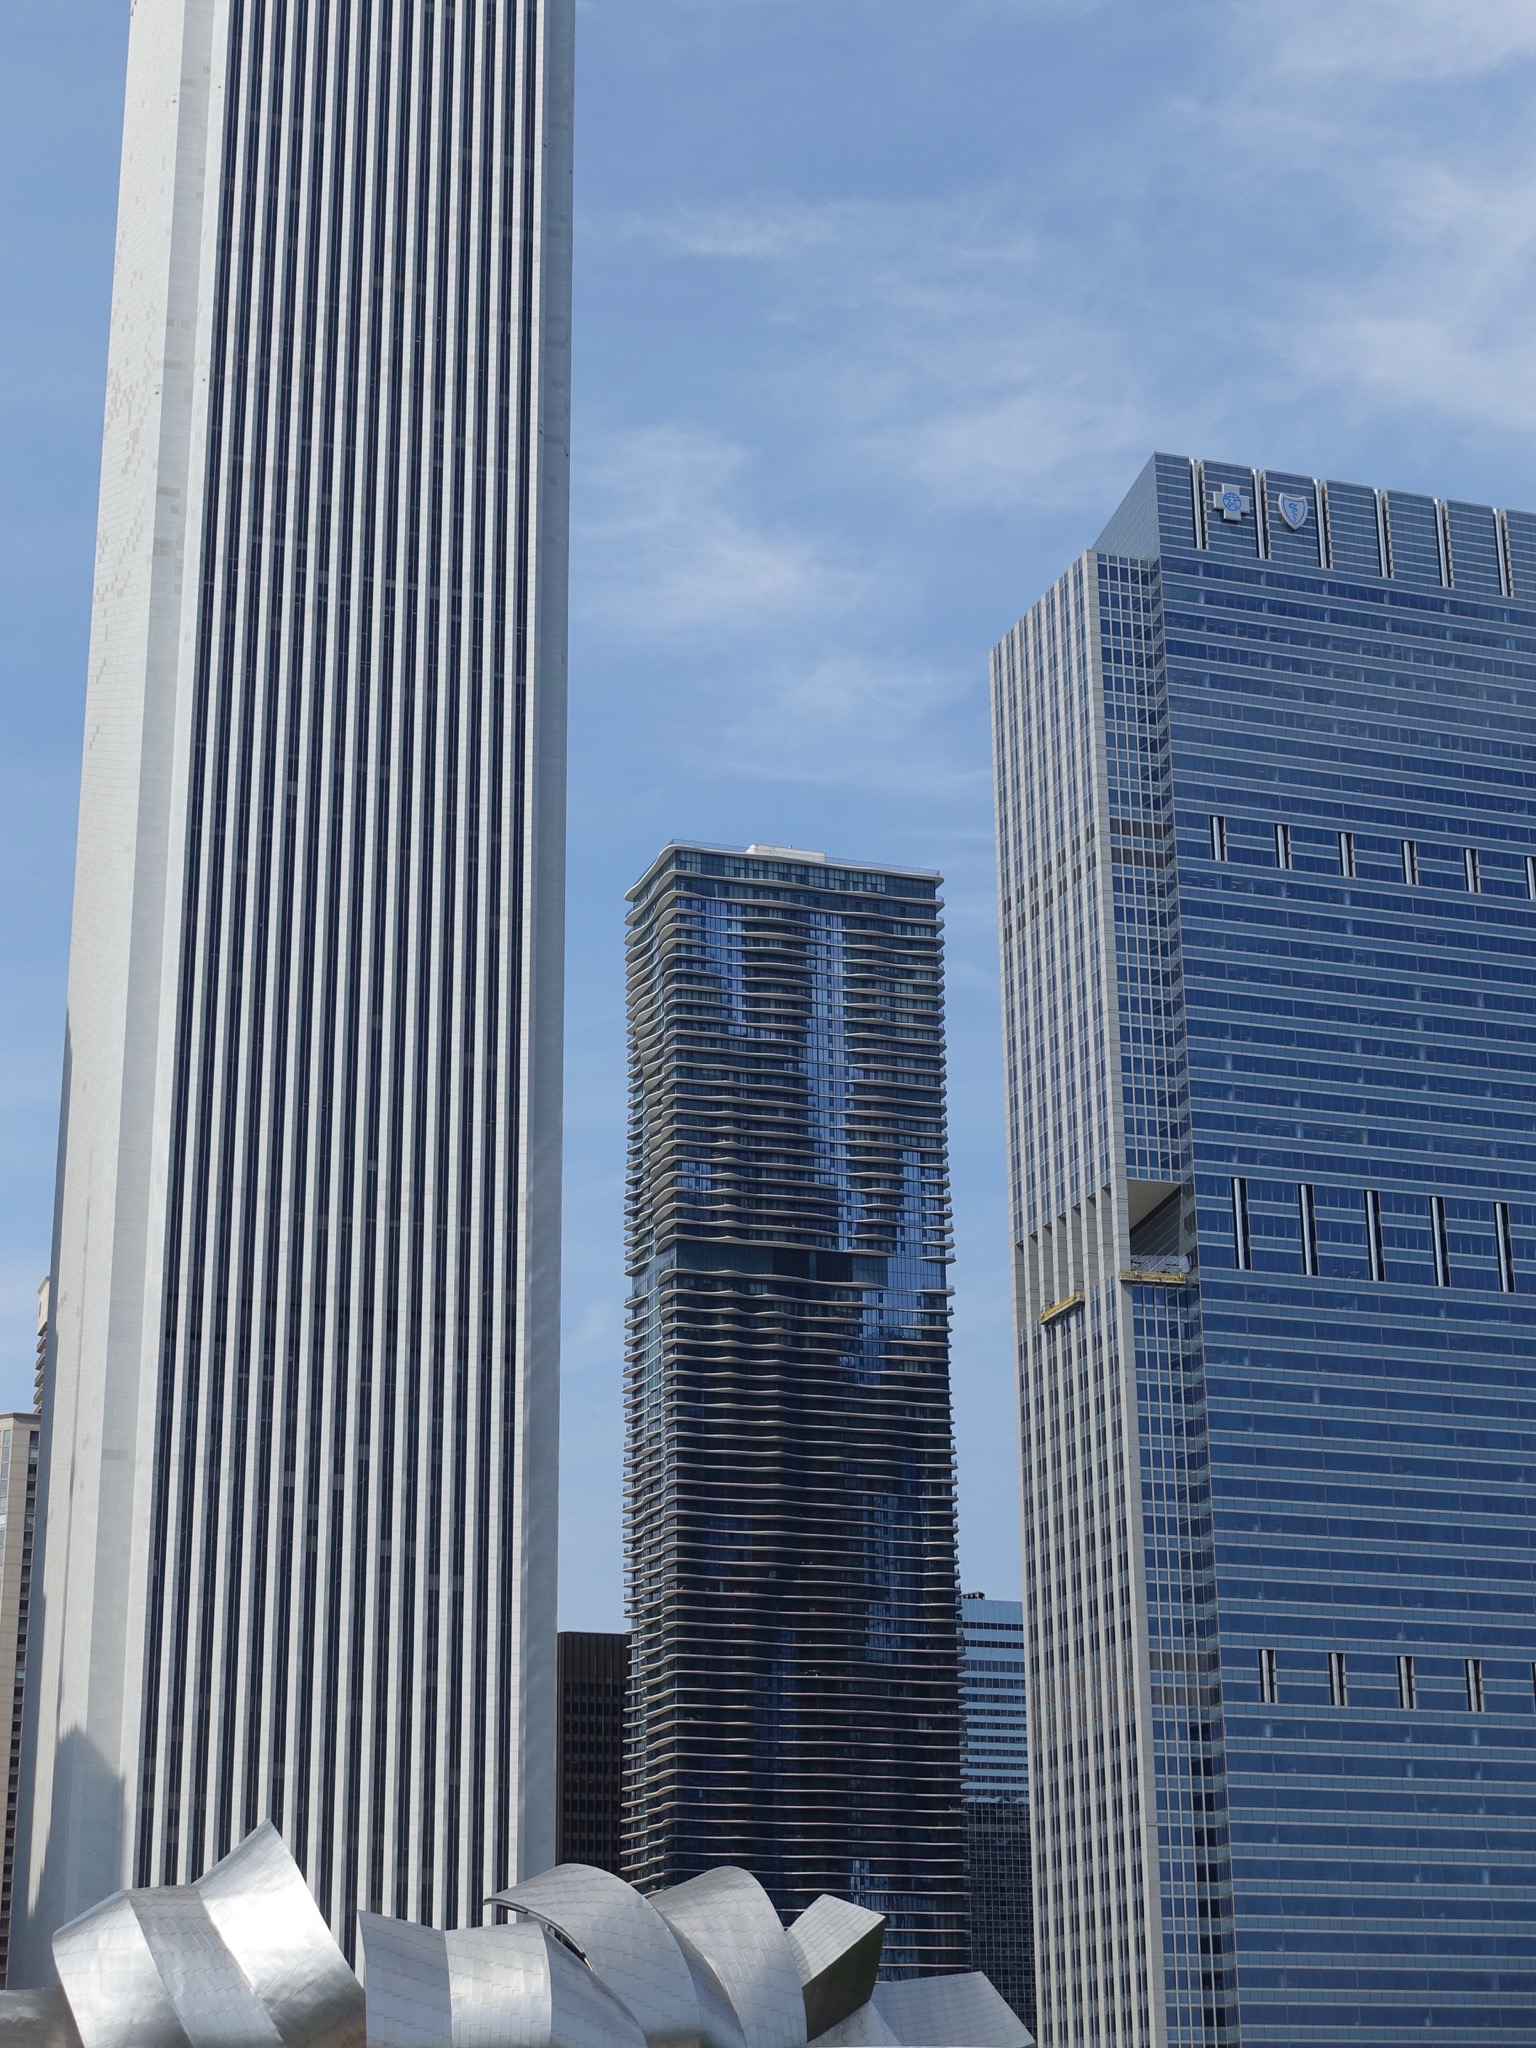 Photo 47 of 135 from the album Highlights Chicago 2015.